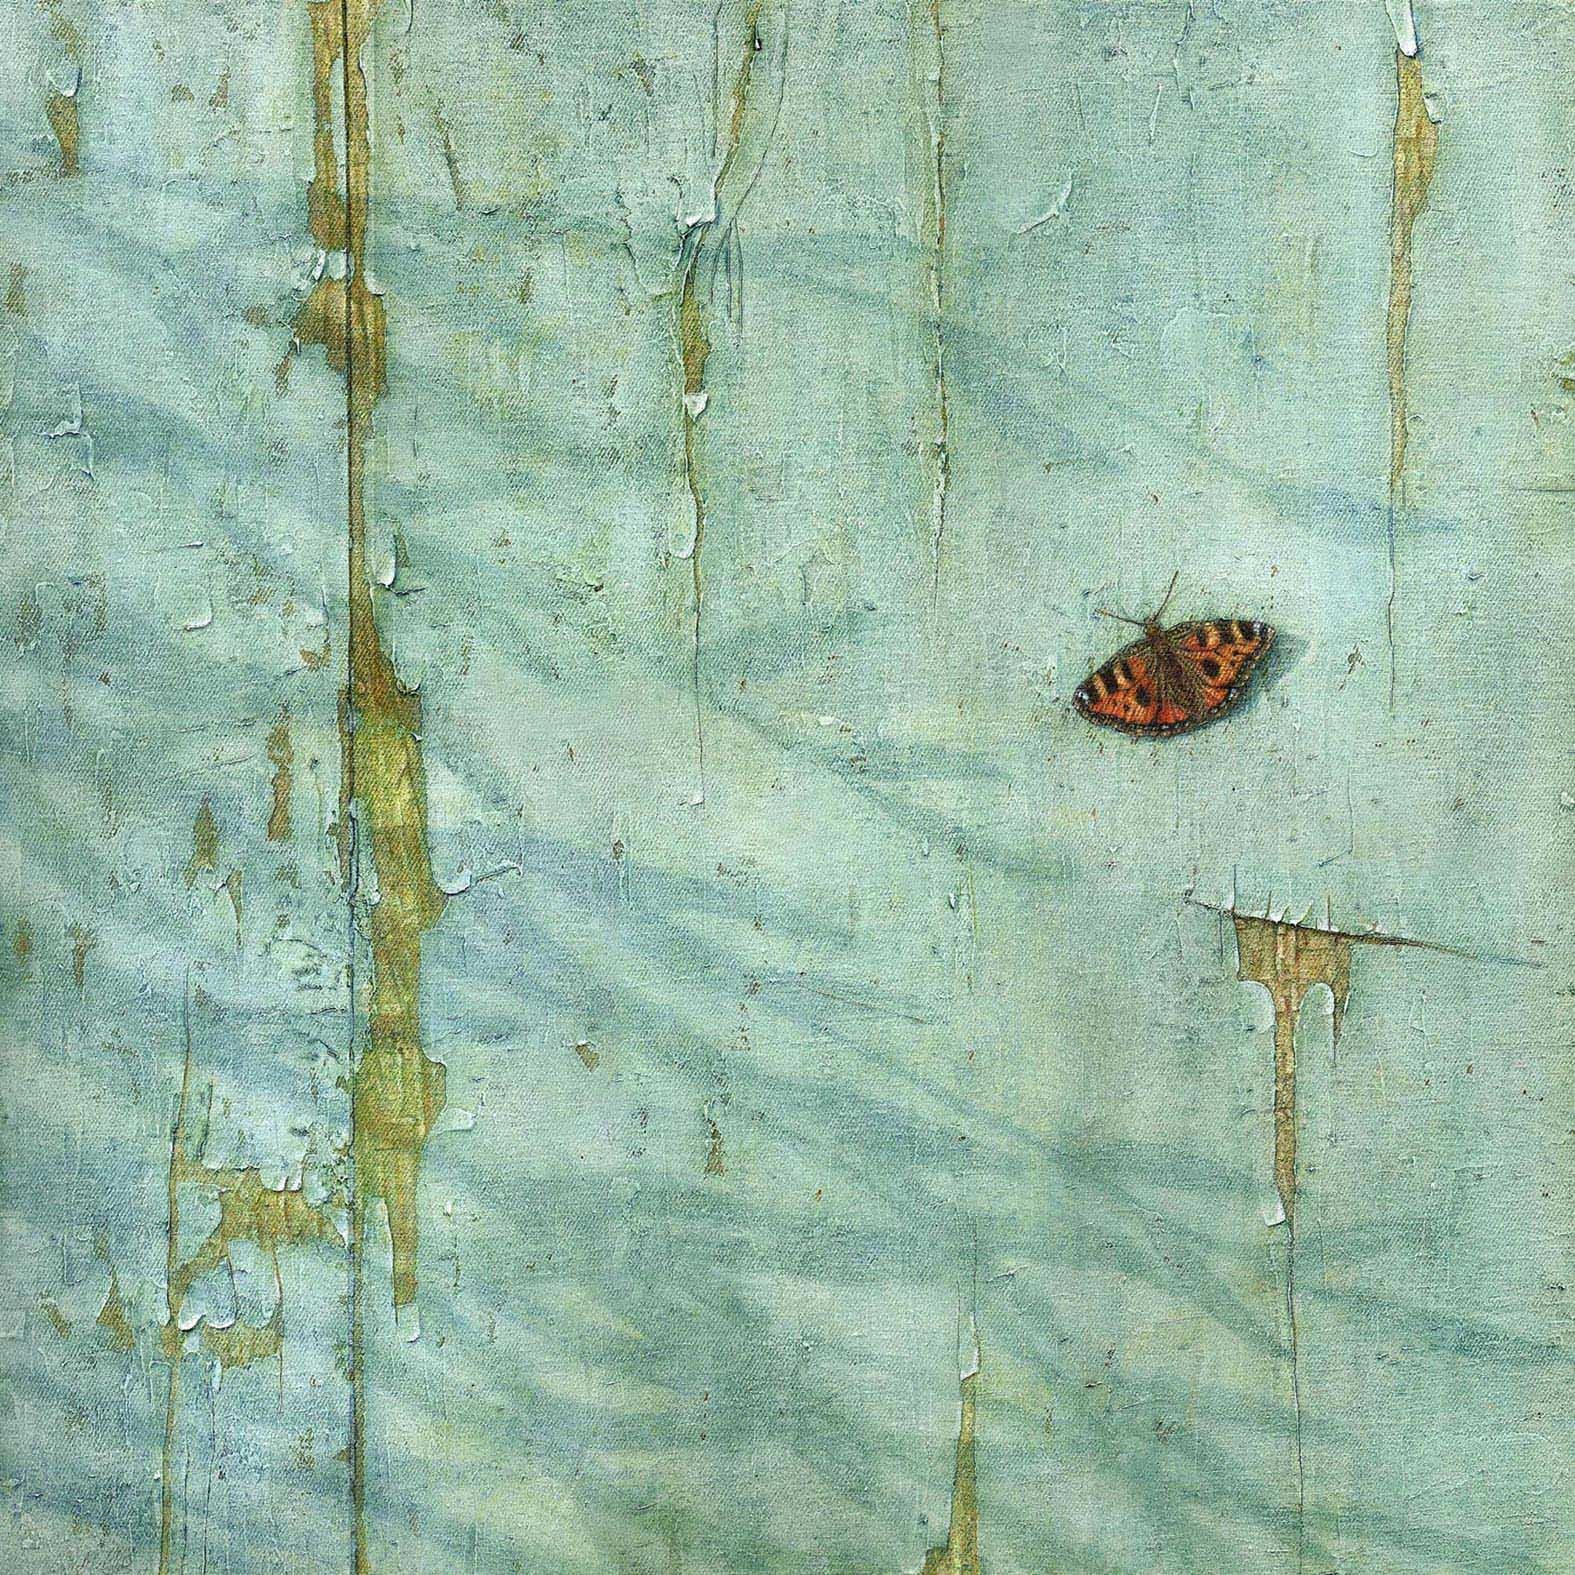 Mike Ellis Still-Life Painting - Butterfly - photorealistic oil painting of a butterfly on the blue decaying door